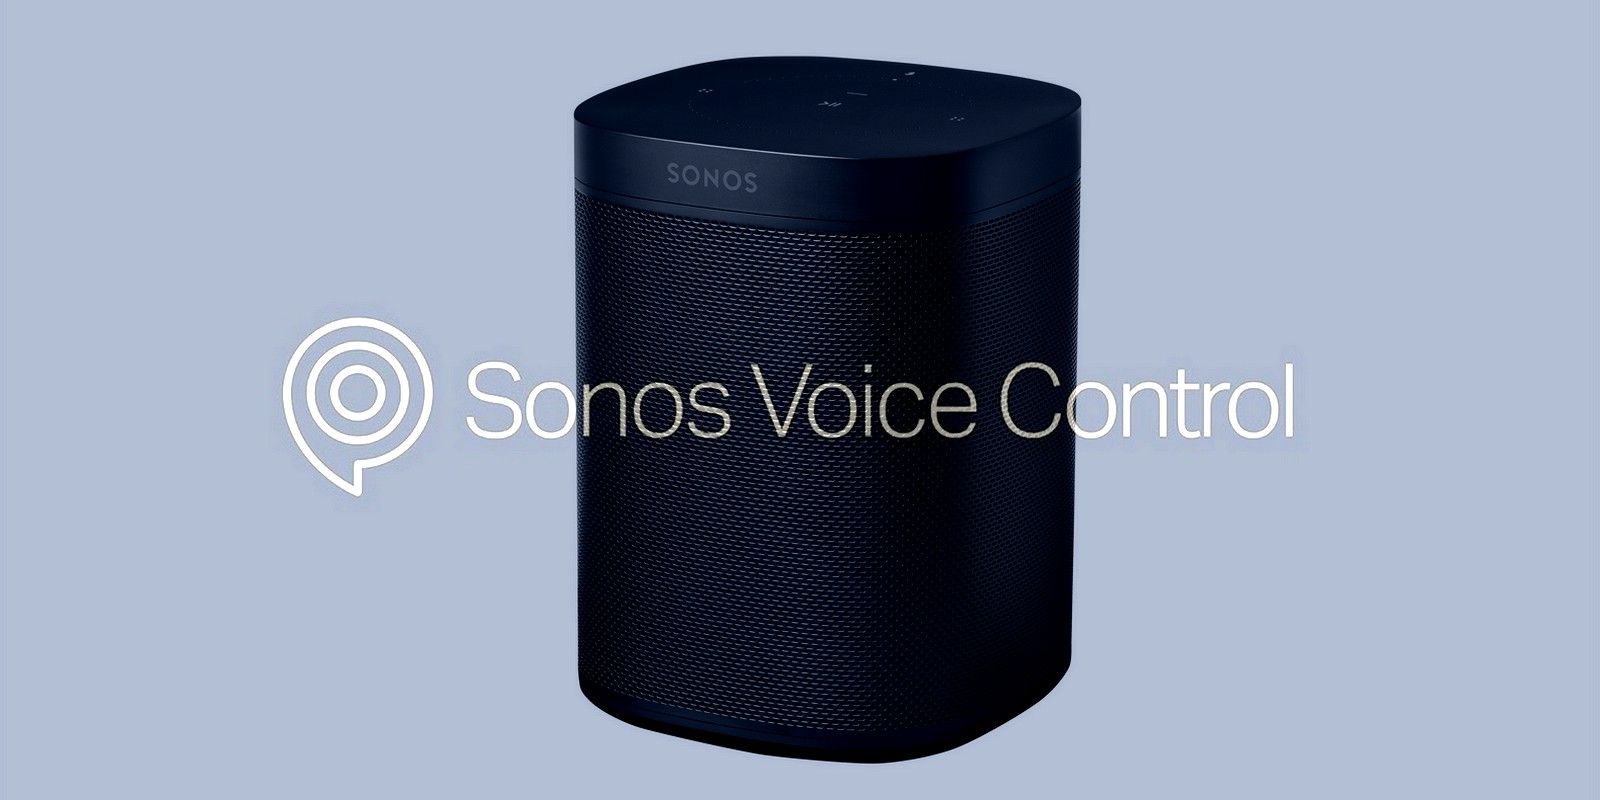 Sonos Voice Control: How To Set Up & Use The Voice Assistant